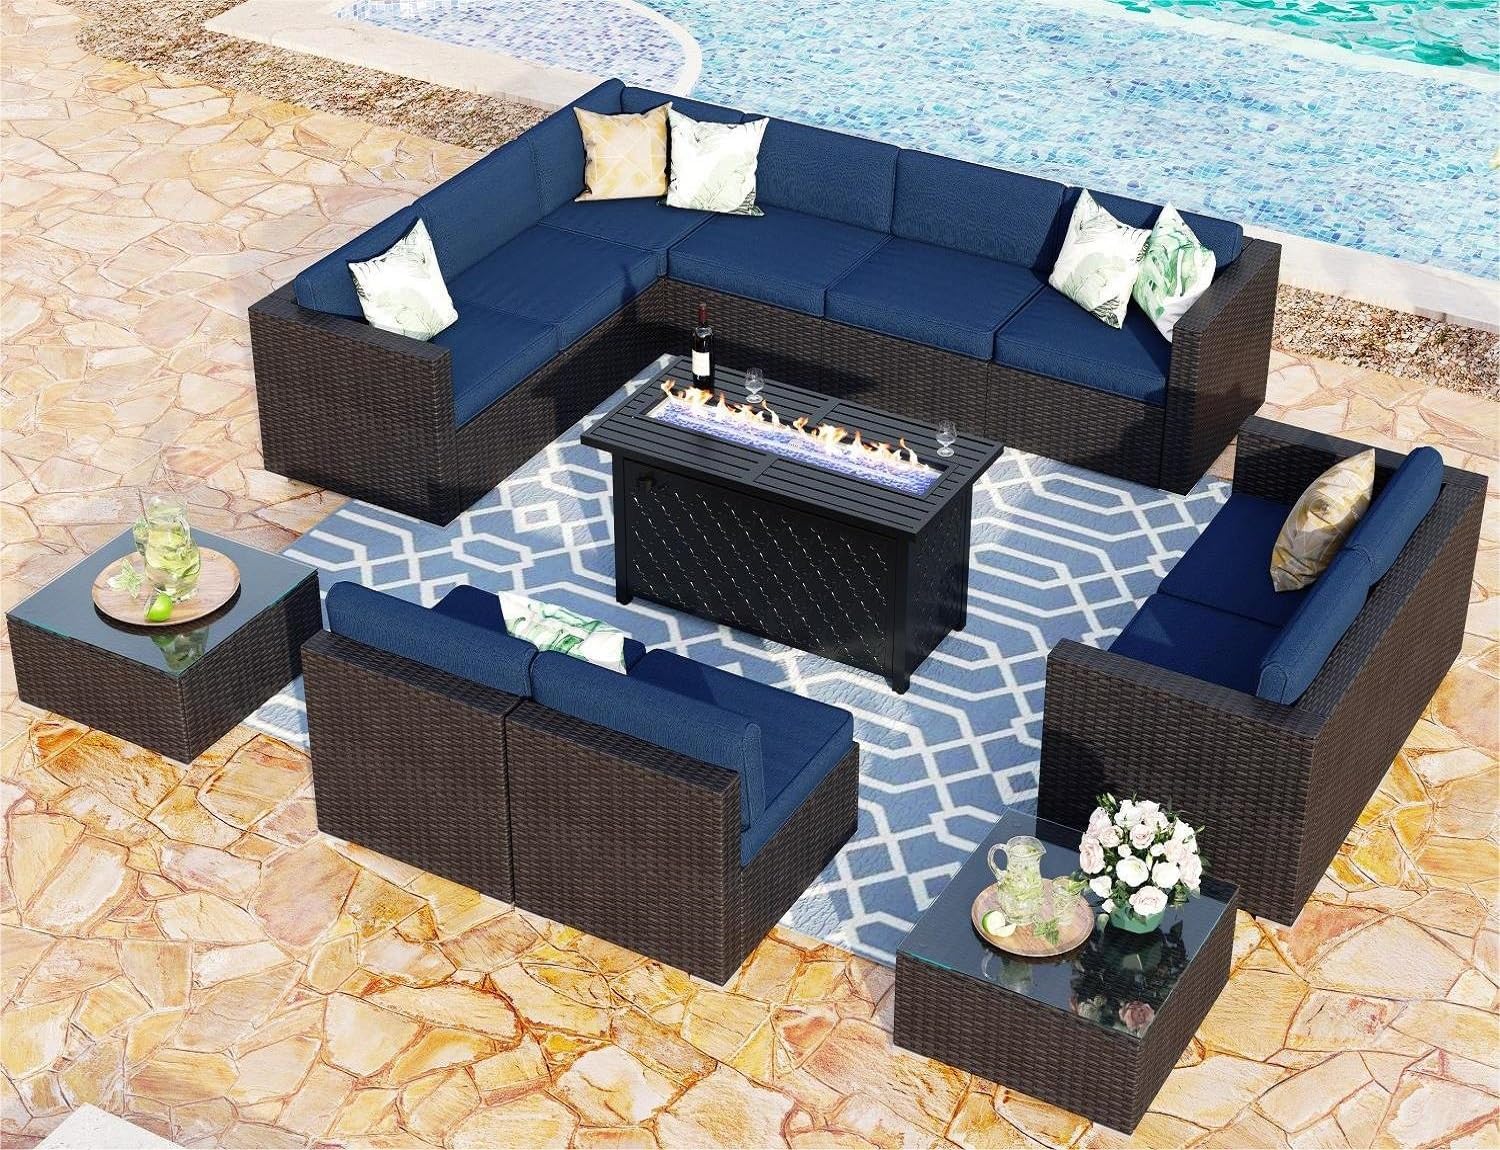 MFSTUDIO 13 Pieces Patio Furniture Set with 45 Plate Embossing Propane Gas Fire Table,Outdoor Wicker PE Rattan Sectional Sofa Conversation Set with Blue Cushions & Glass Table